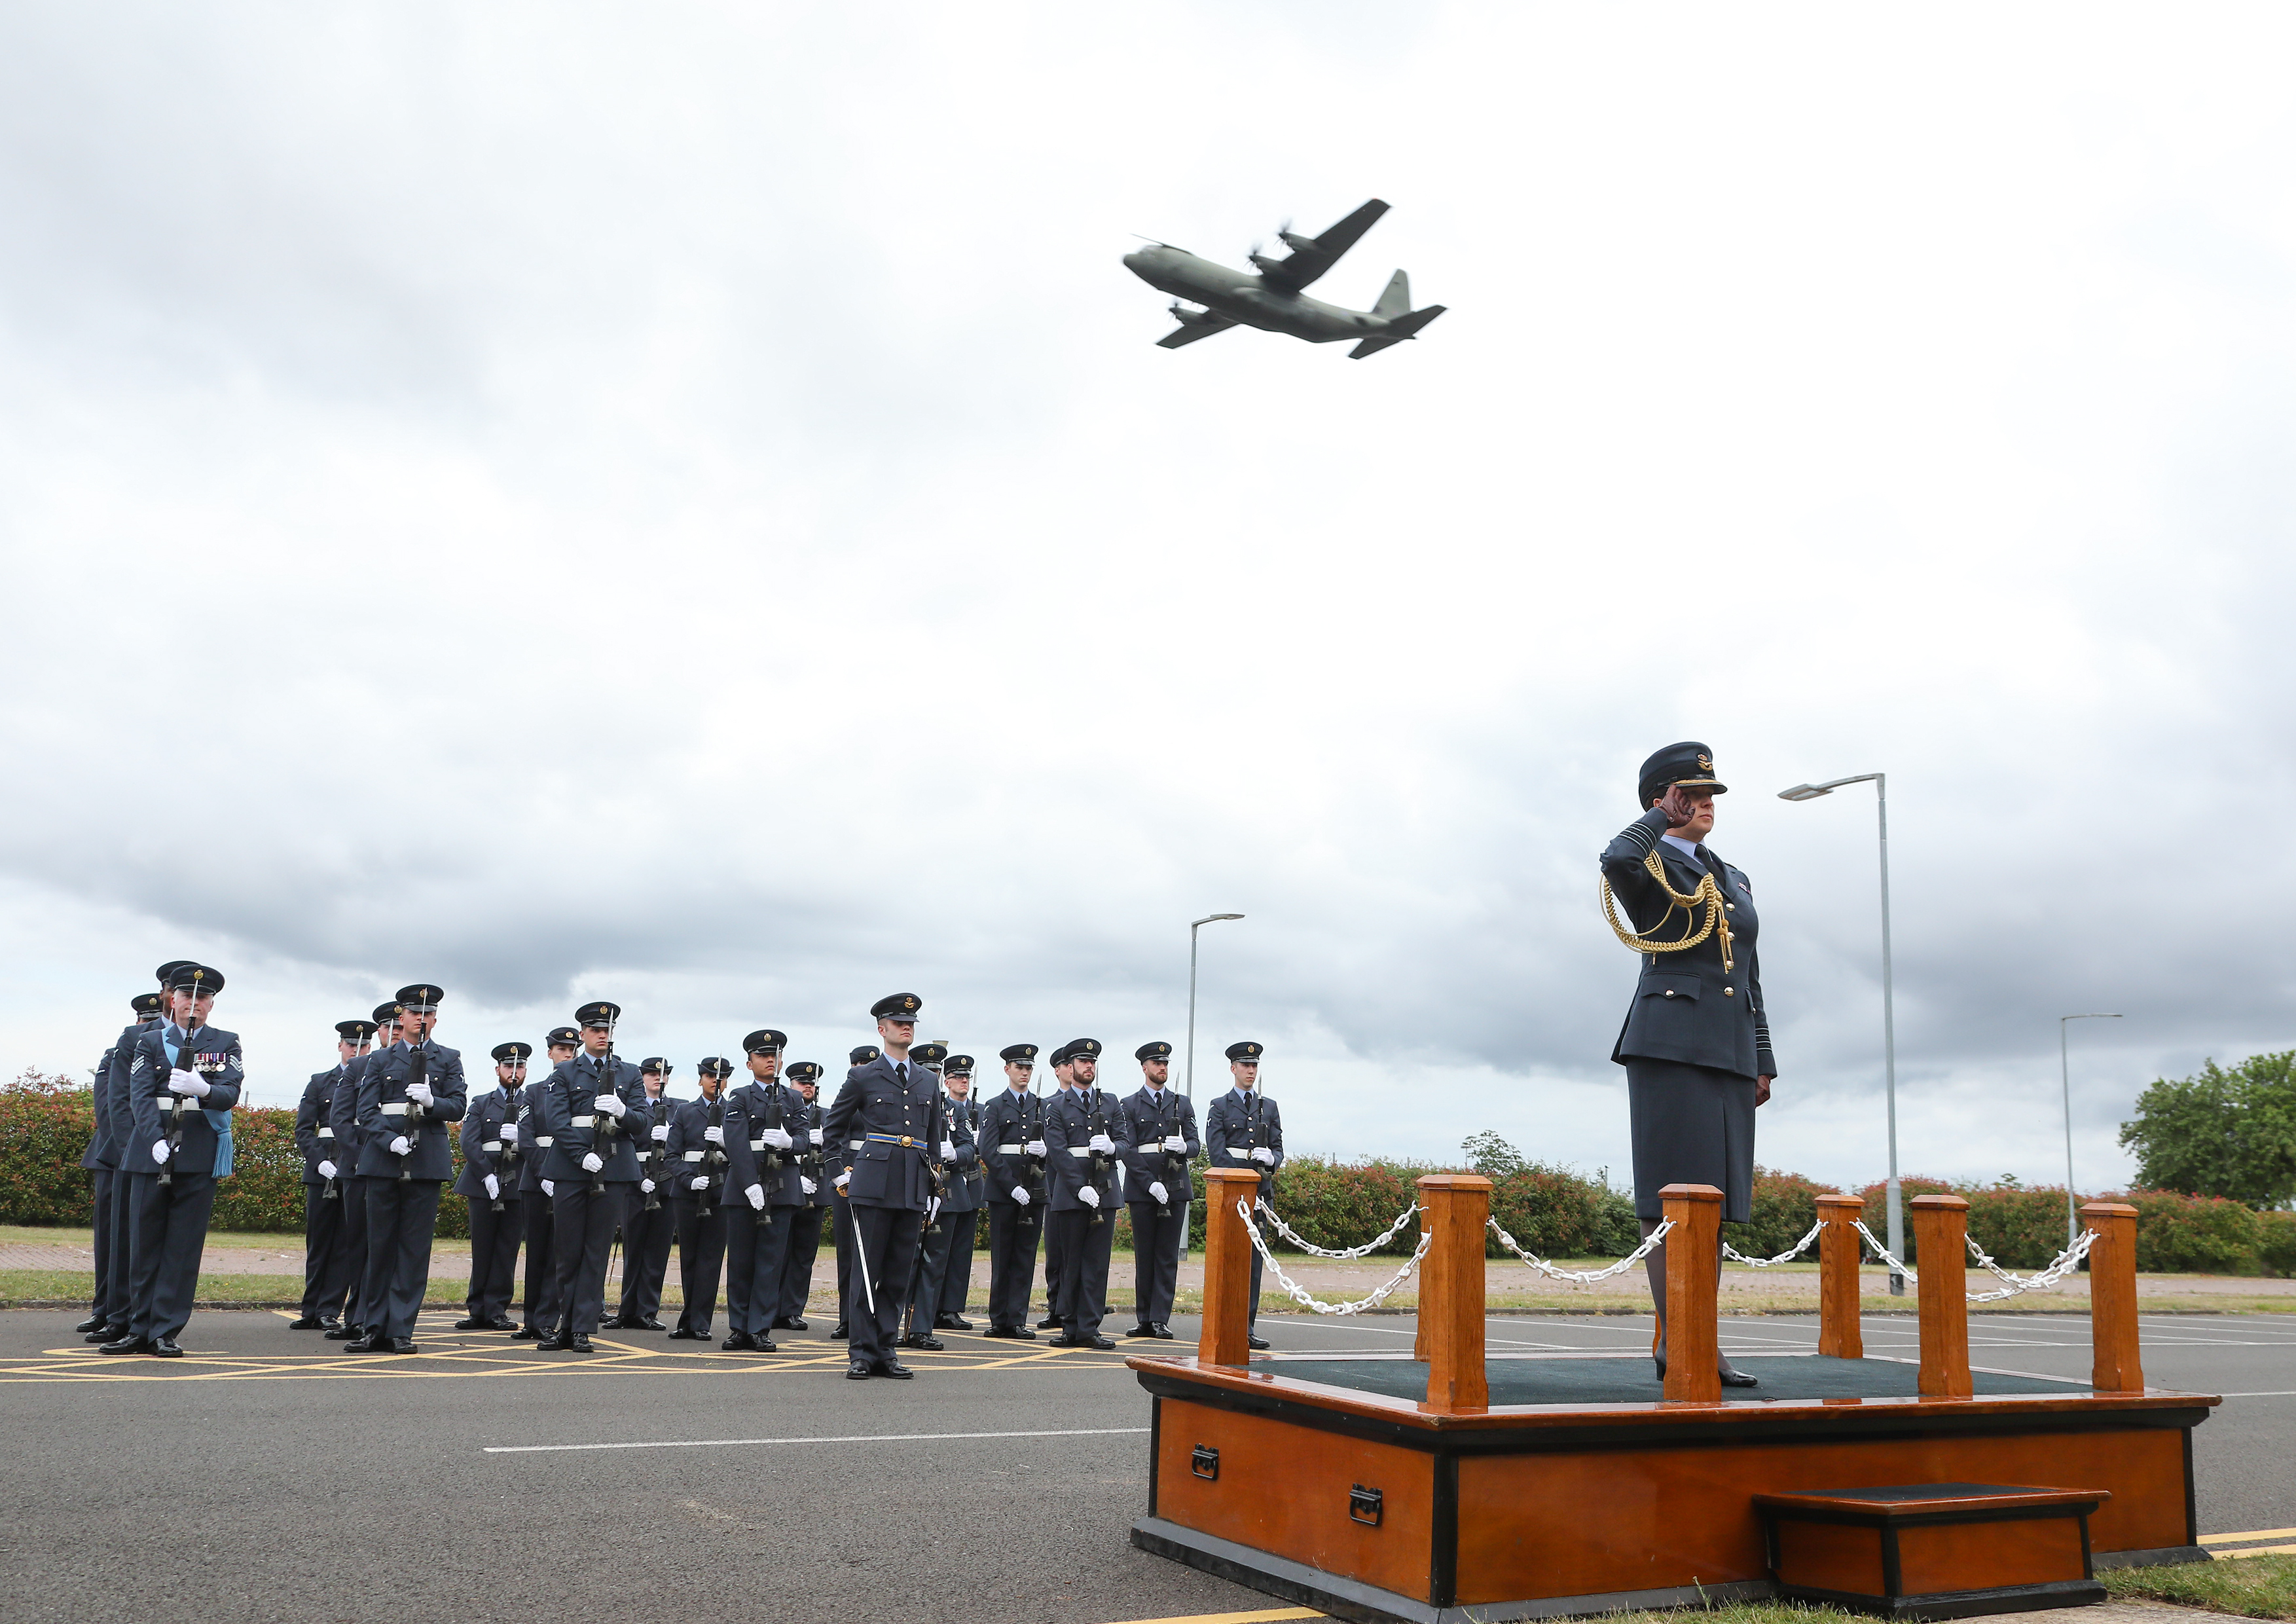 RAF Brize Norton Welcomes Guests to the Annual Formal Reception